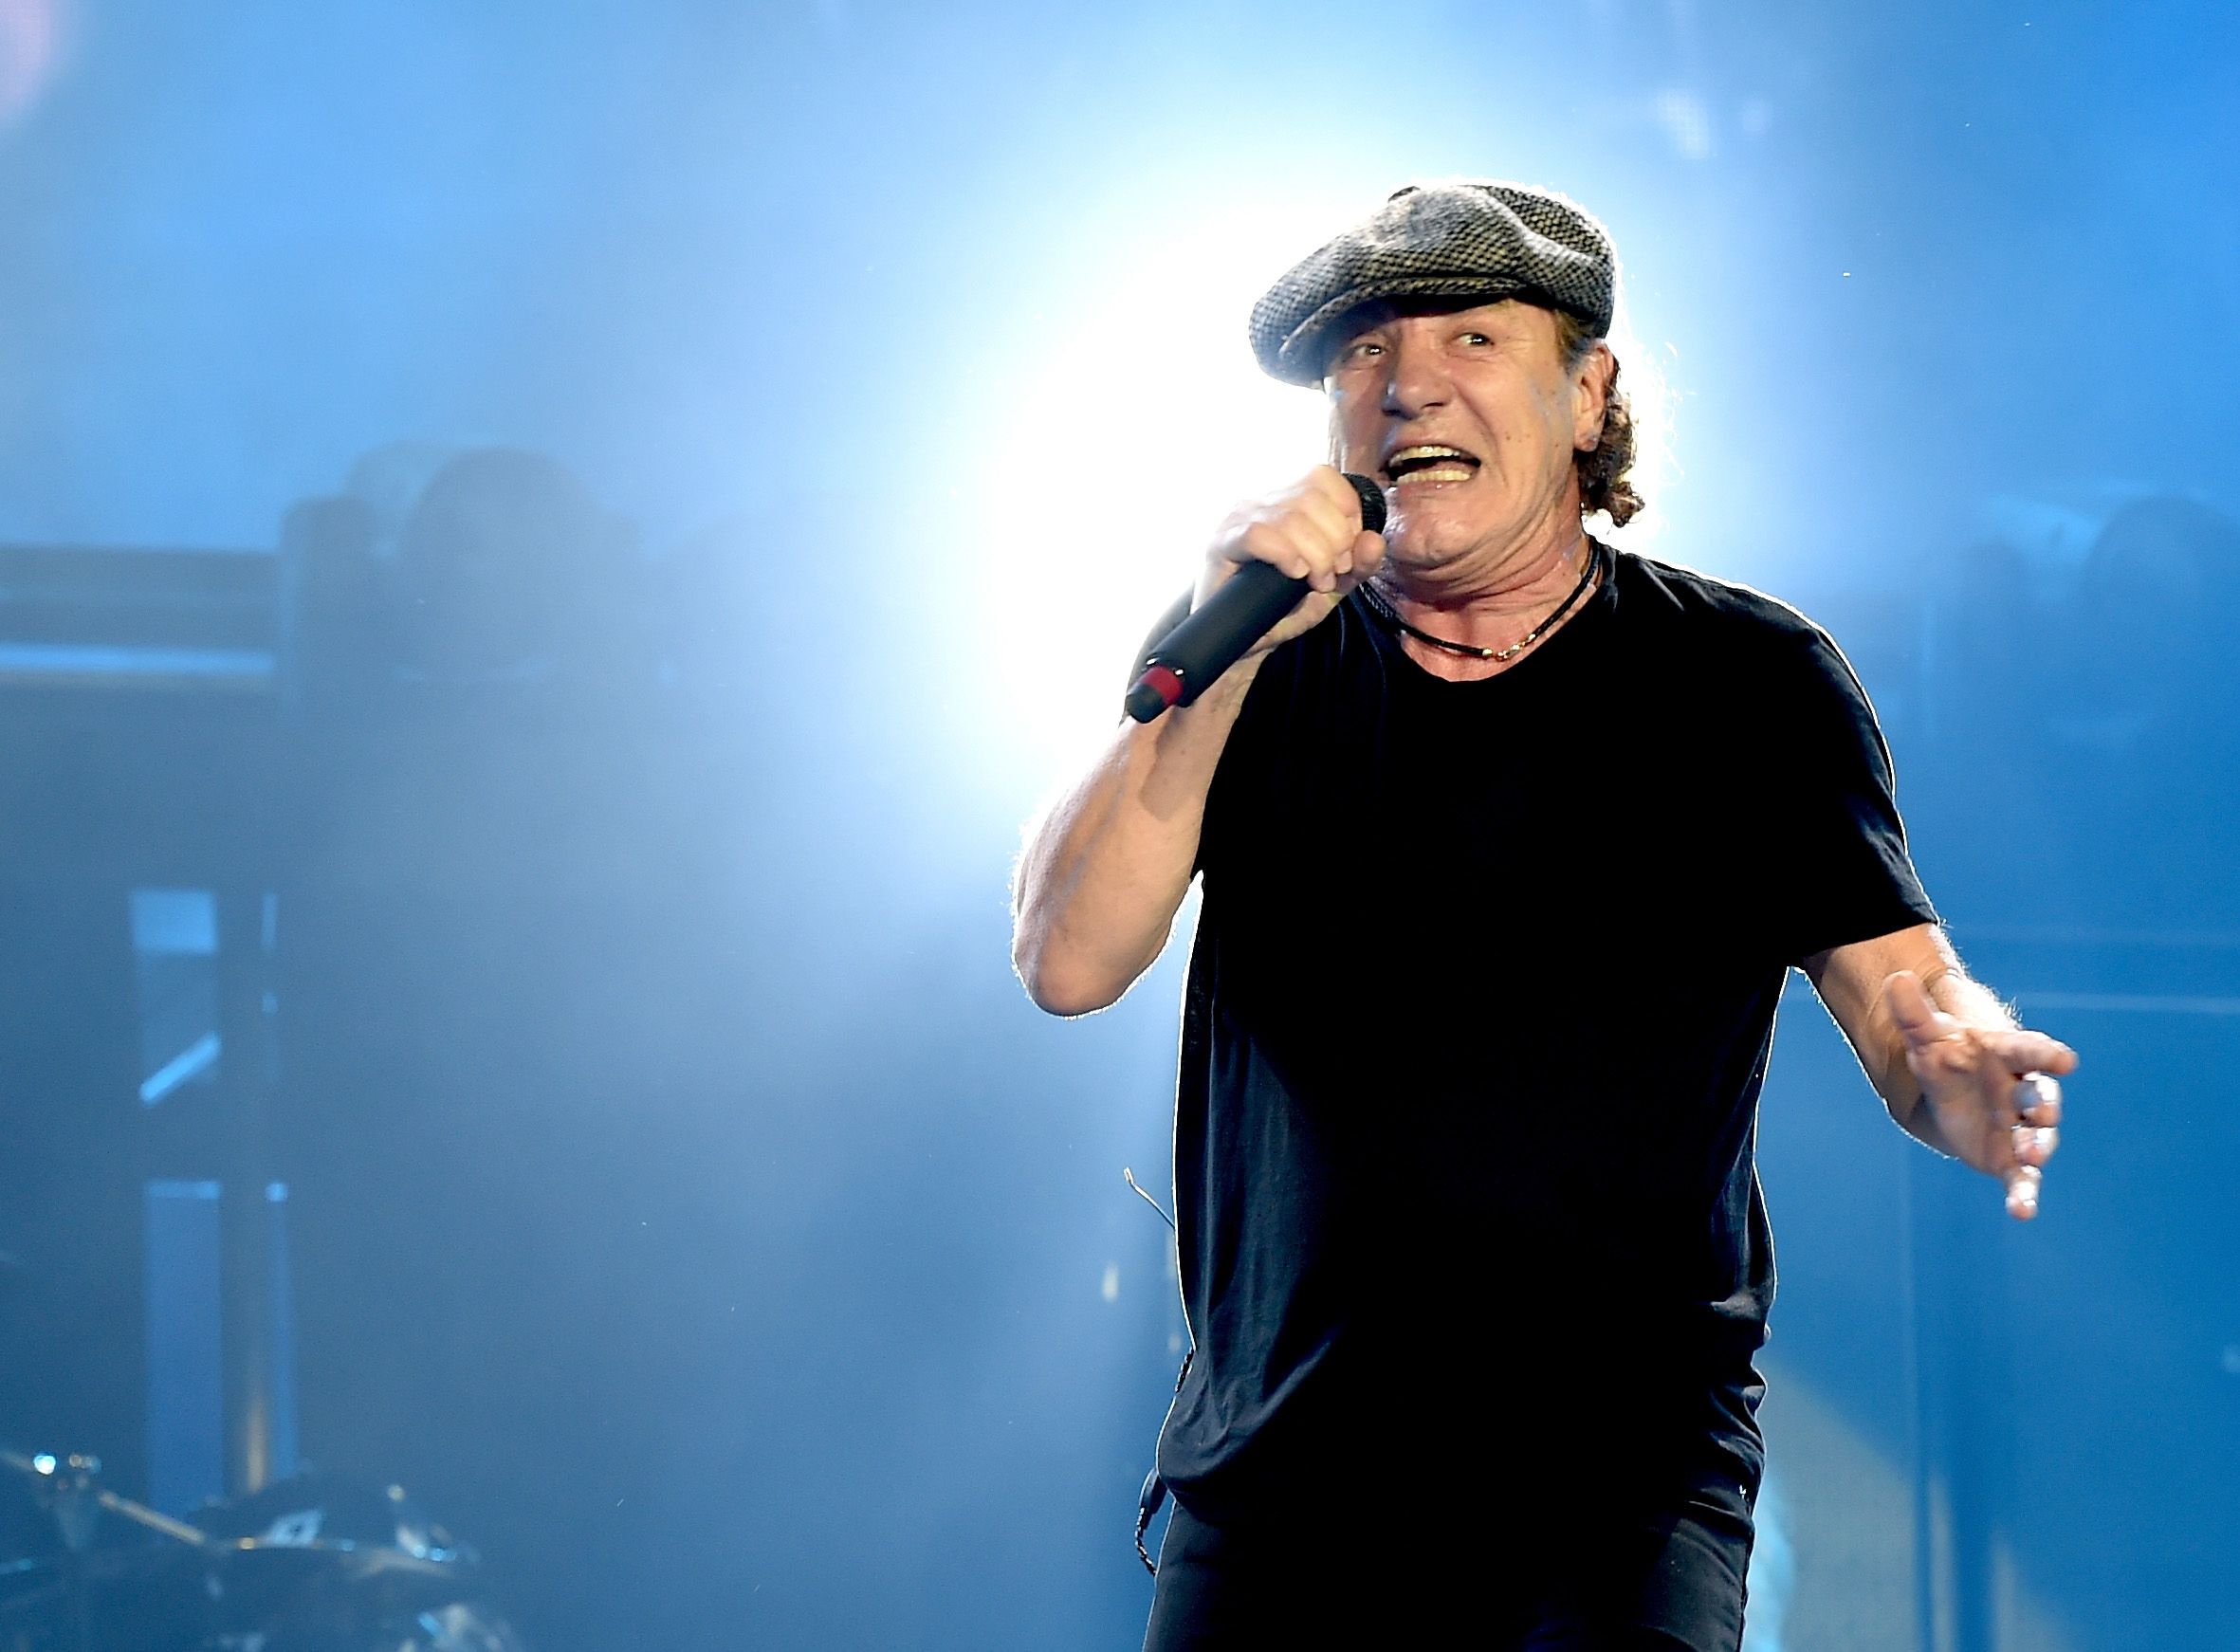 Brian Johnson's hearing issues force AC/DC to reschedule tour dates